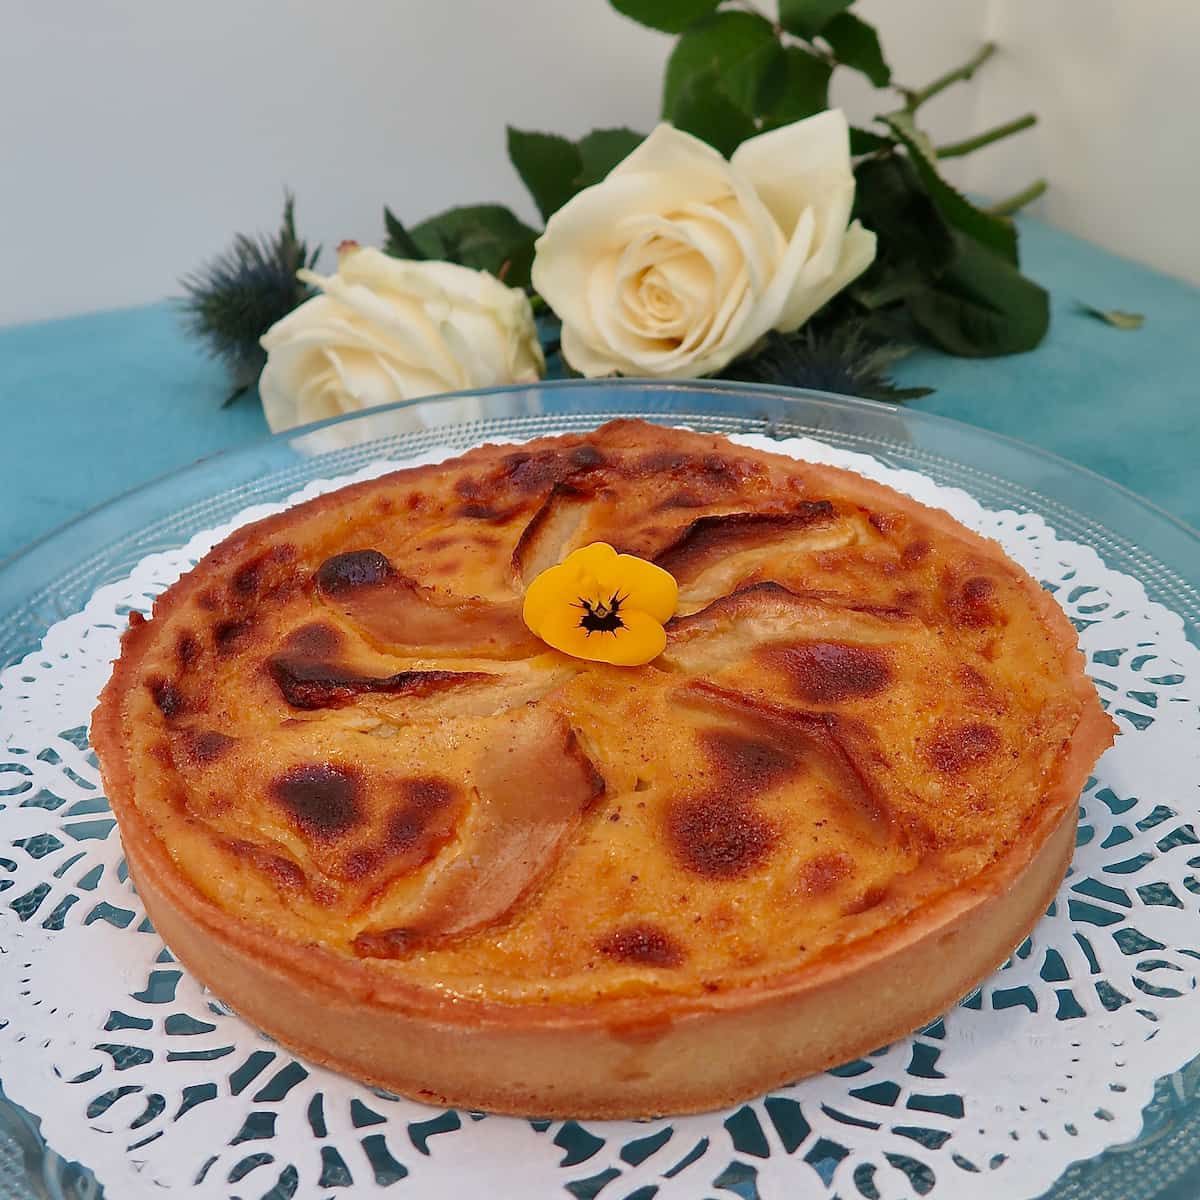 Round toasted custard tart with apples topped with an edible flower